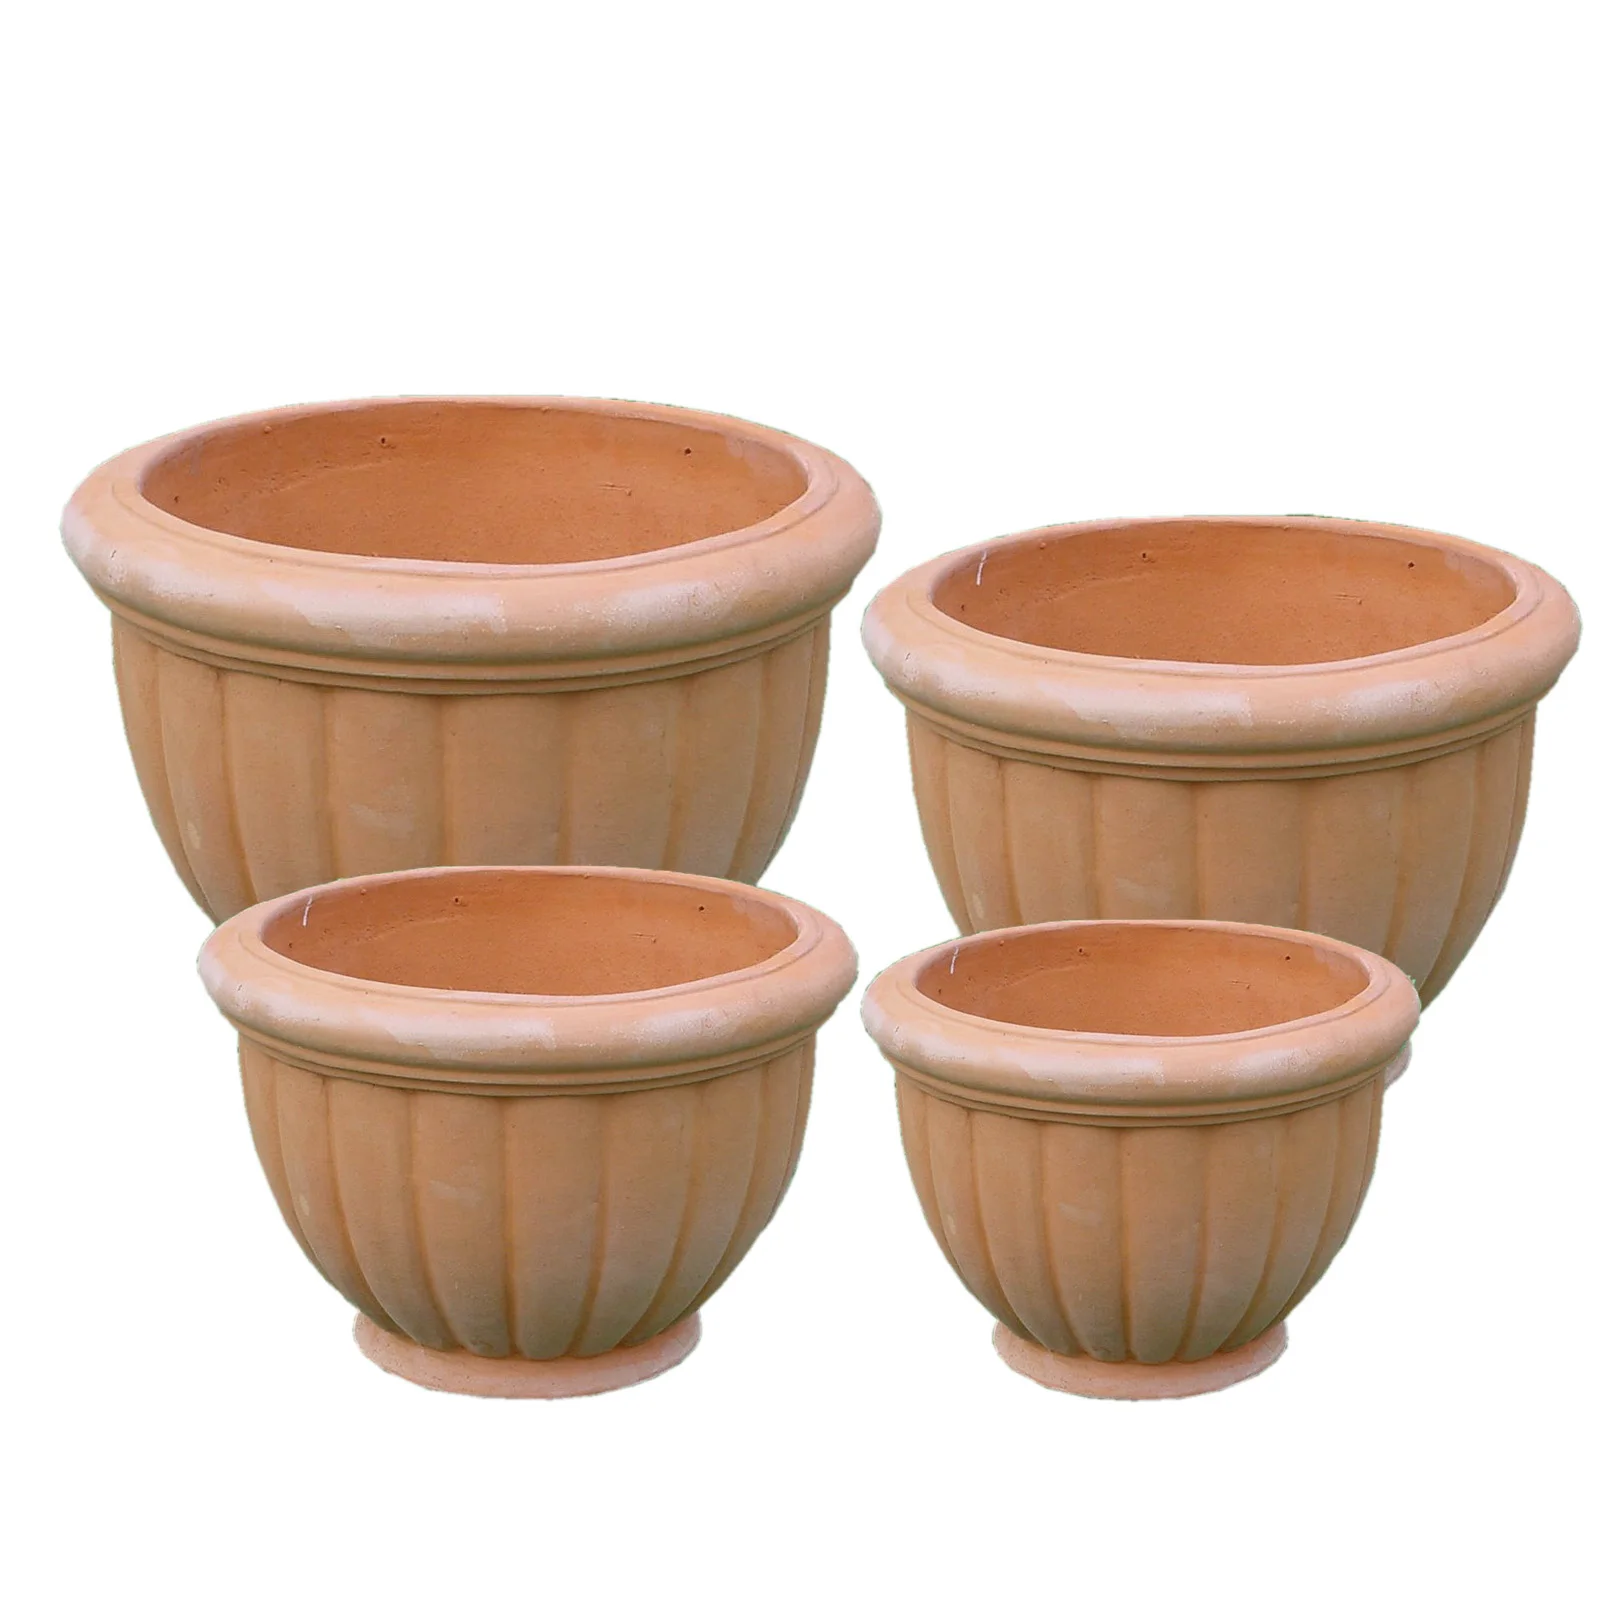 Wholesale Outdoor Terracotta Ceramic Flower Pots and Clay Planters for Garden Nursery or Home Use Floor Suitable